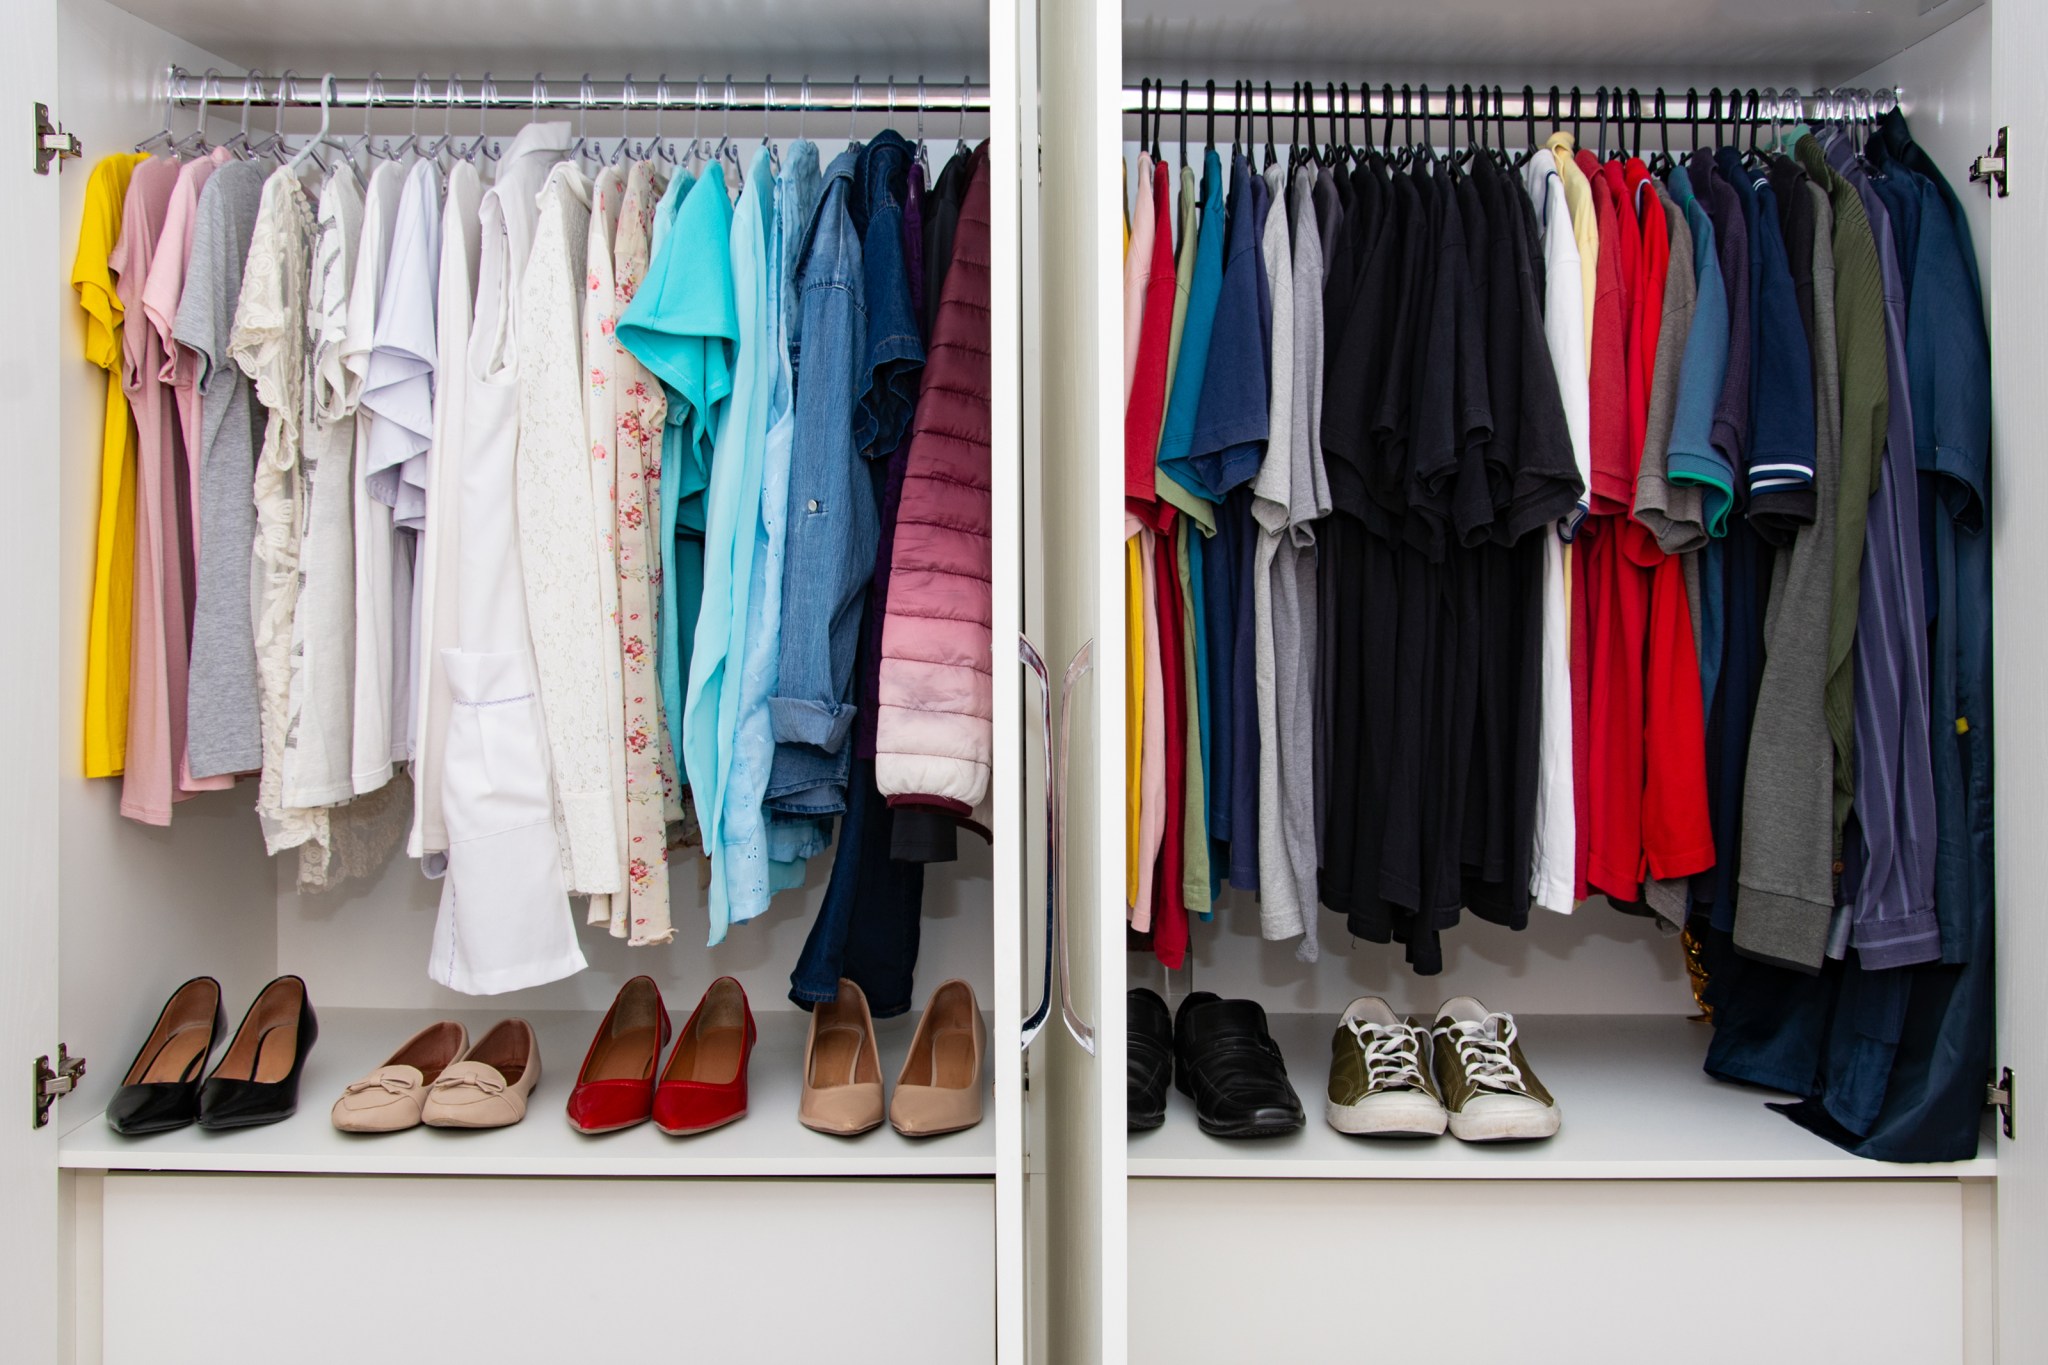 Closet Accessories, Shelf Organizers, Storage Solutions and More